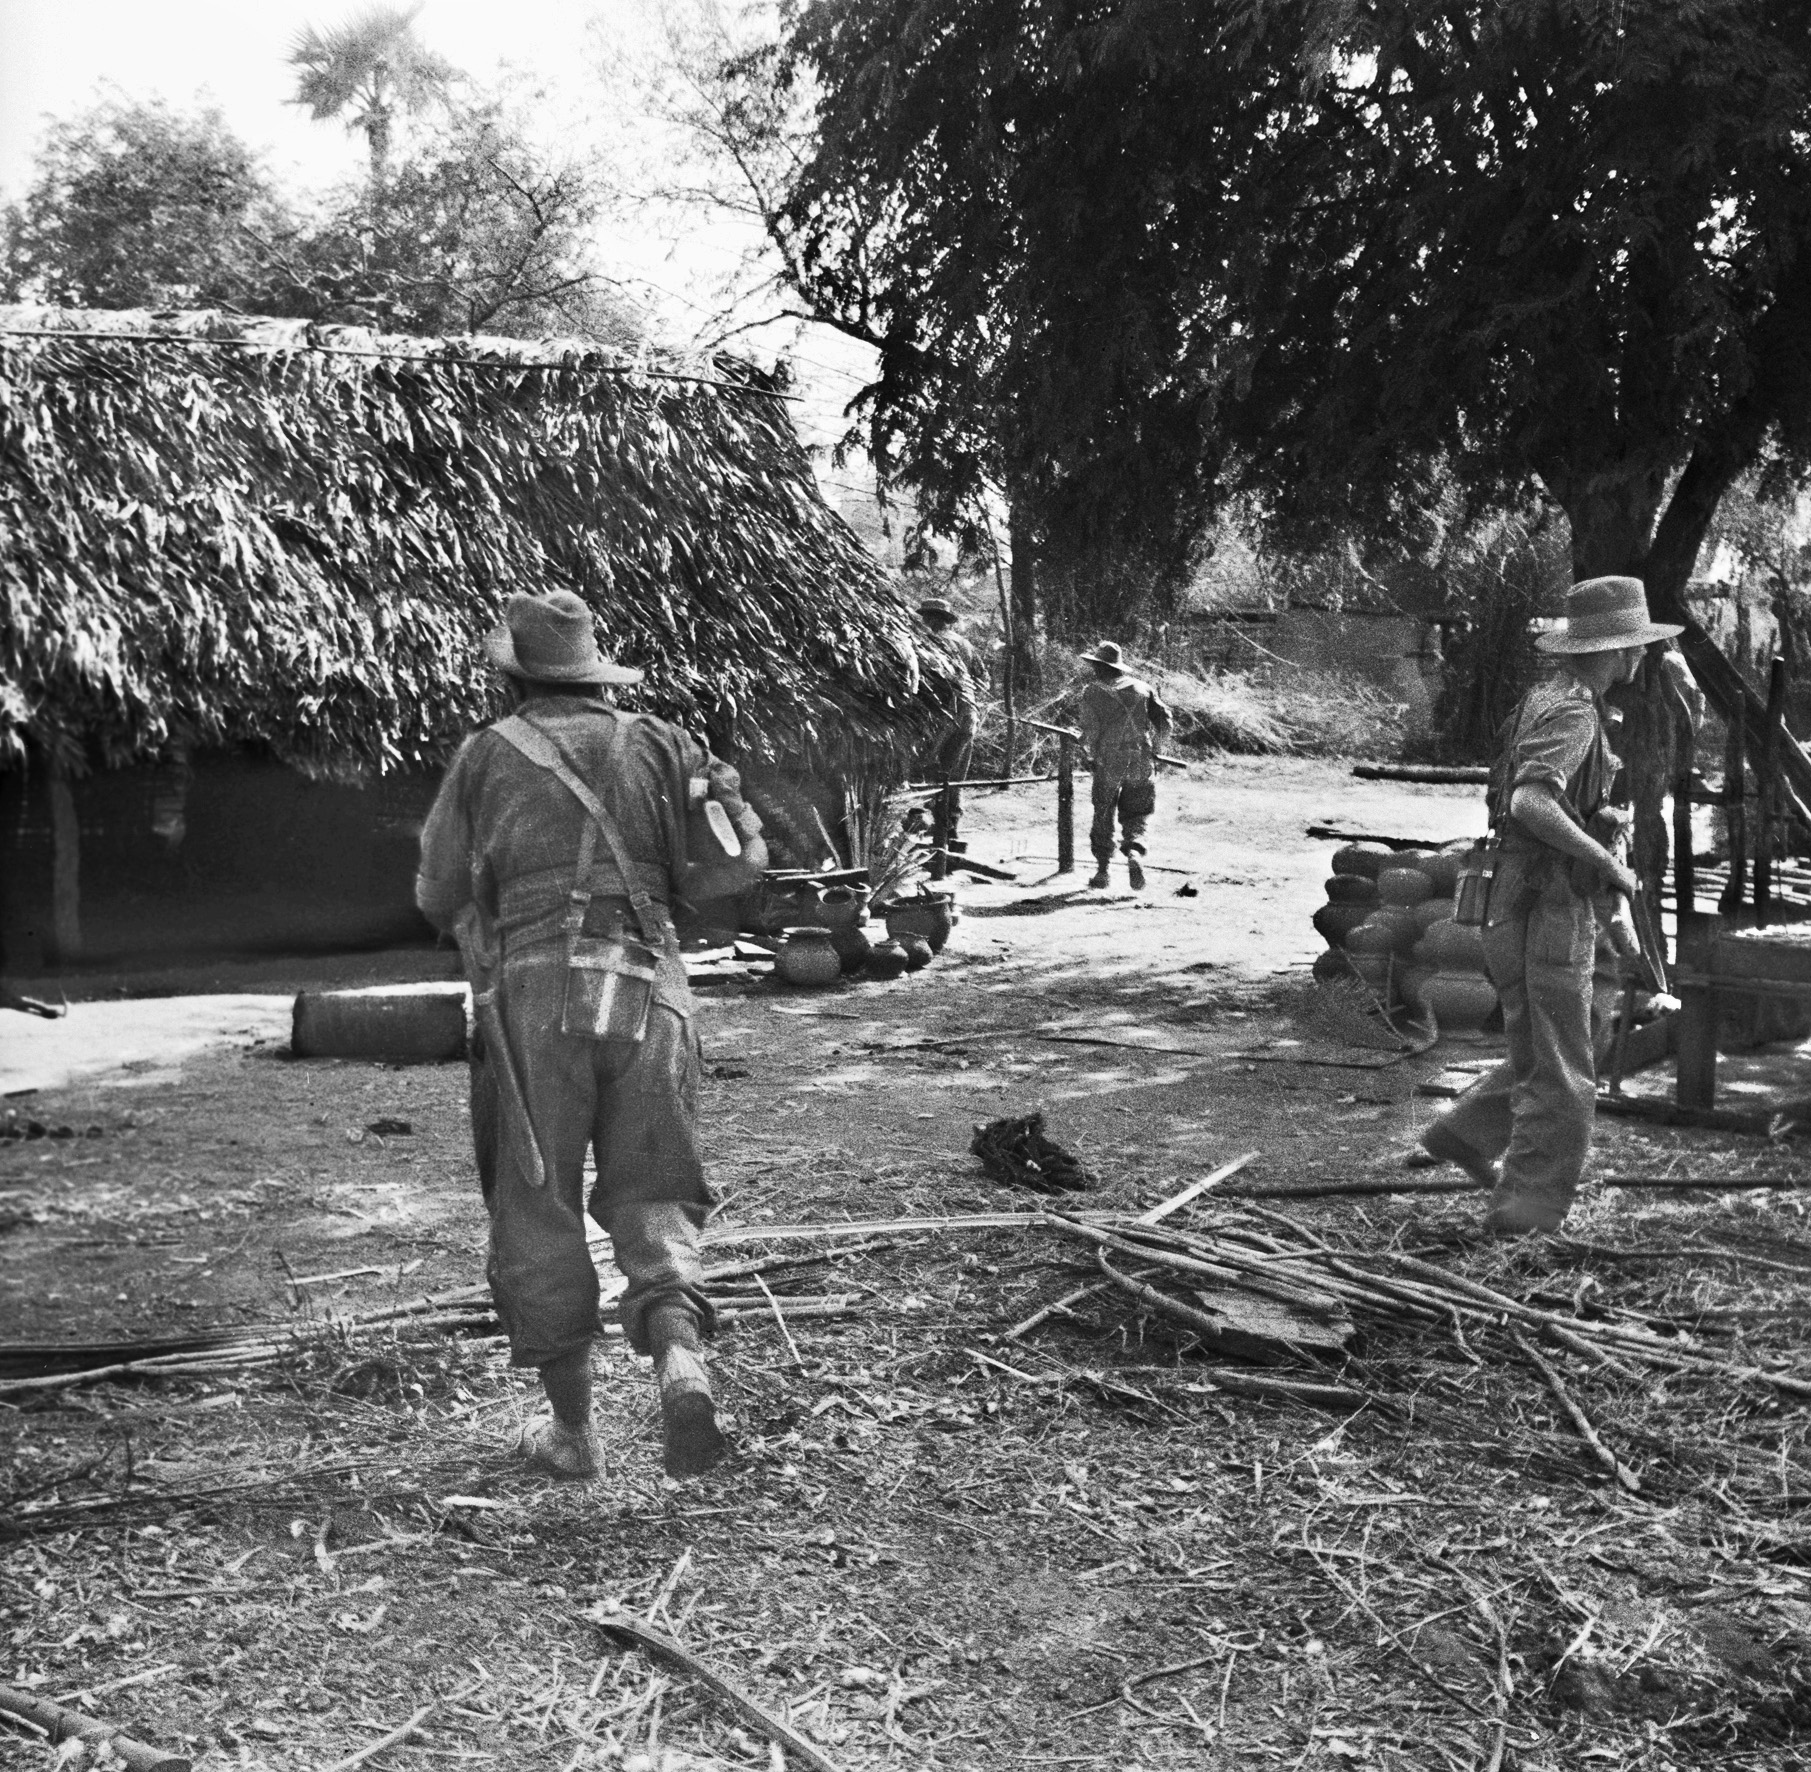 Infantry search village huts on the outskirts of Meiktila. British and Indian forces worked hard to secure areas because the Japanese frequently infiltrated back into the position from which they had been driven out the day before.